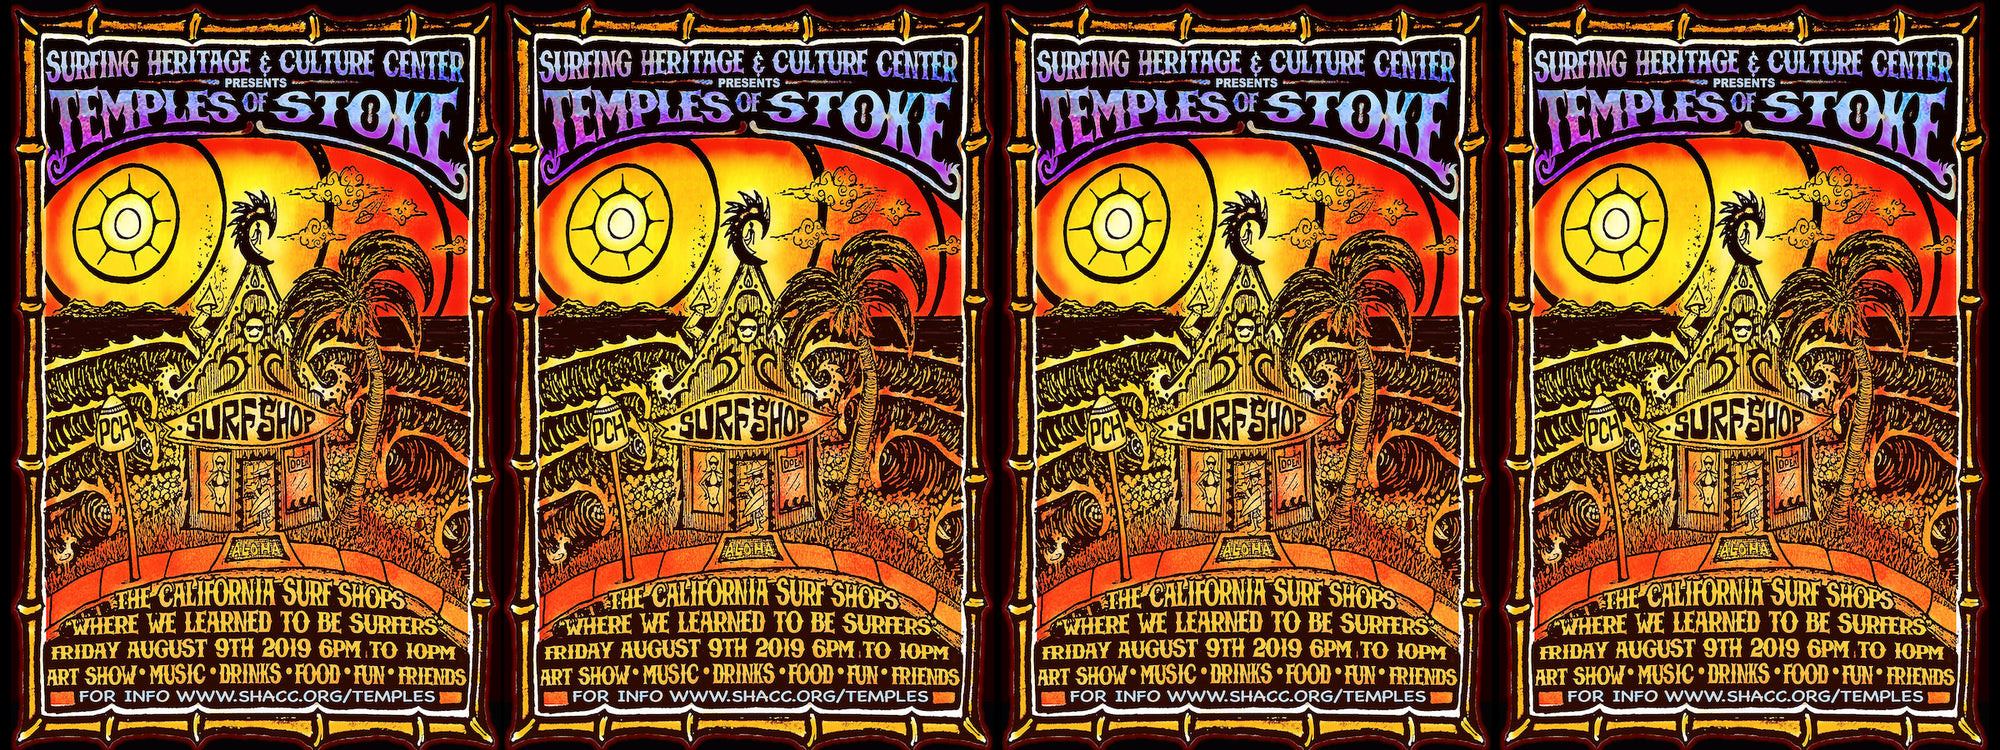 Temples of Stoke at Surfing Heritage and Culture Center